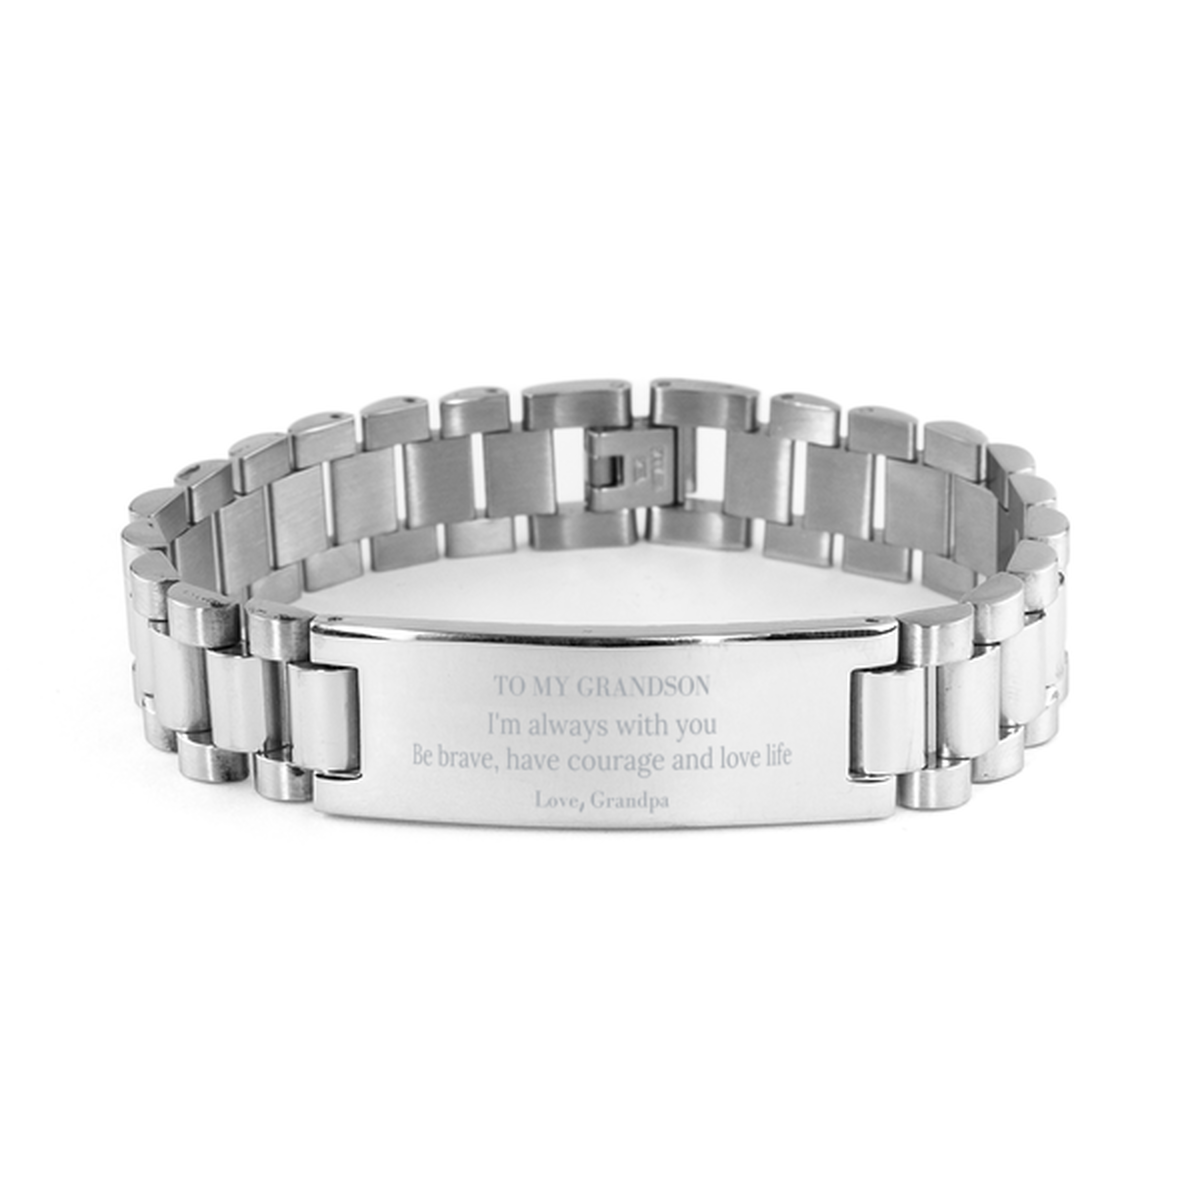 To My Grandson Gifts from Grandpa, Unique Ladder Stainless Steel Bracelet Inspirational Christmas Birthday Graduation Gifts for Grandson I'm always with you. Be brave, have courage and love life. Love, Grandpa